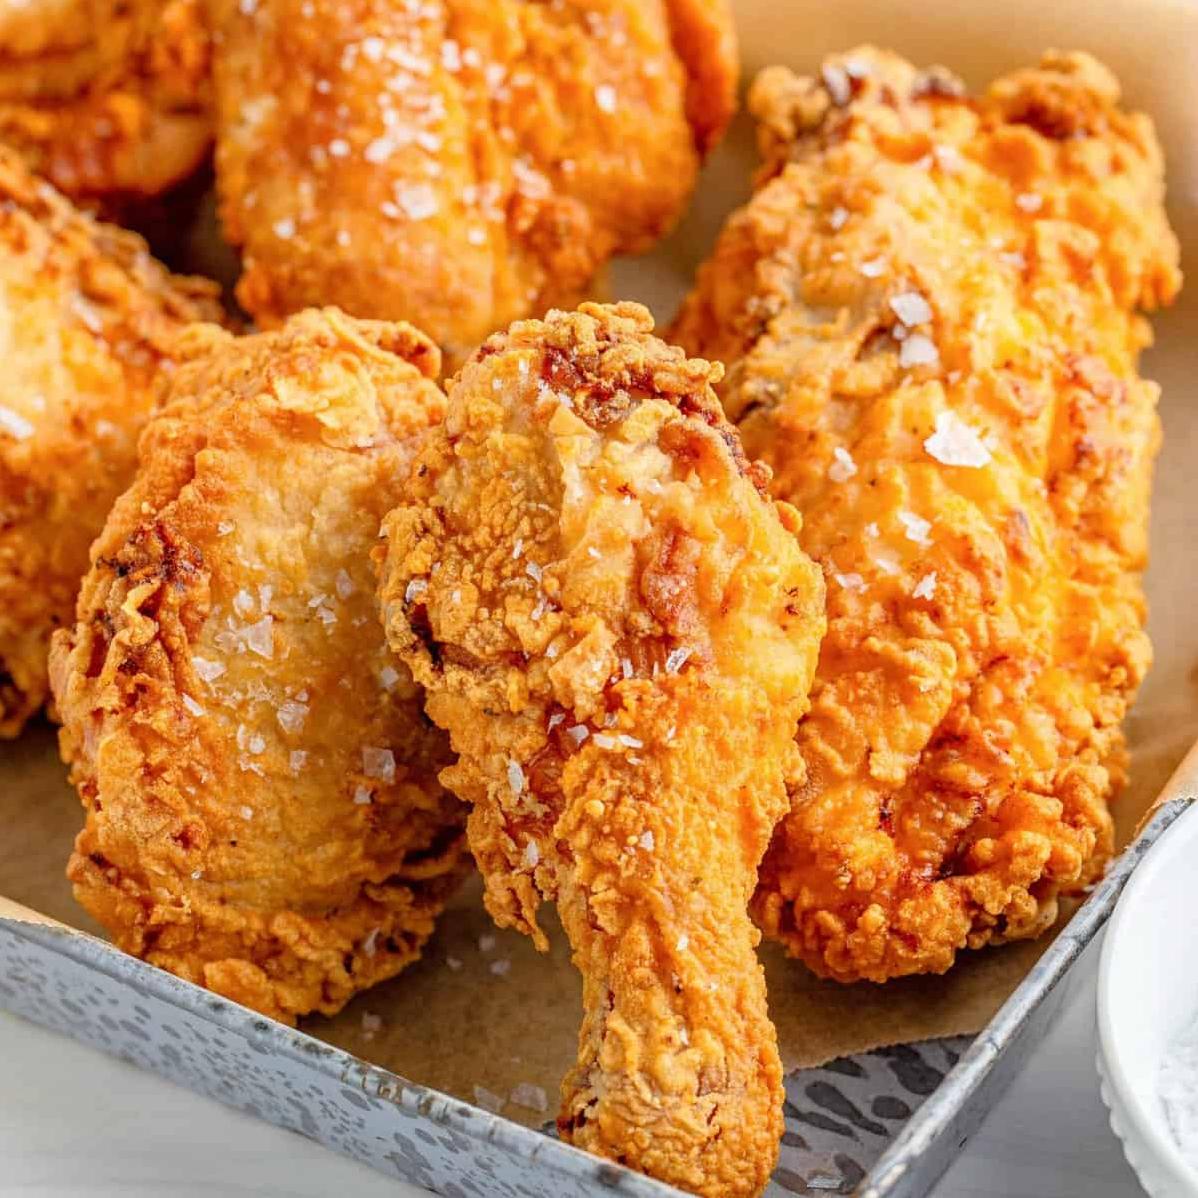  The ultimate southern comfort food - Real Southern Fried Chicken!